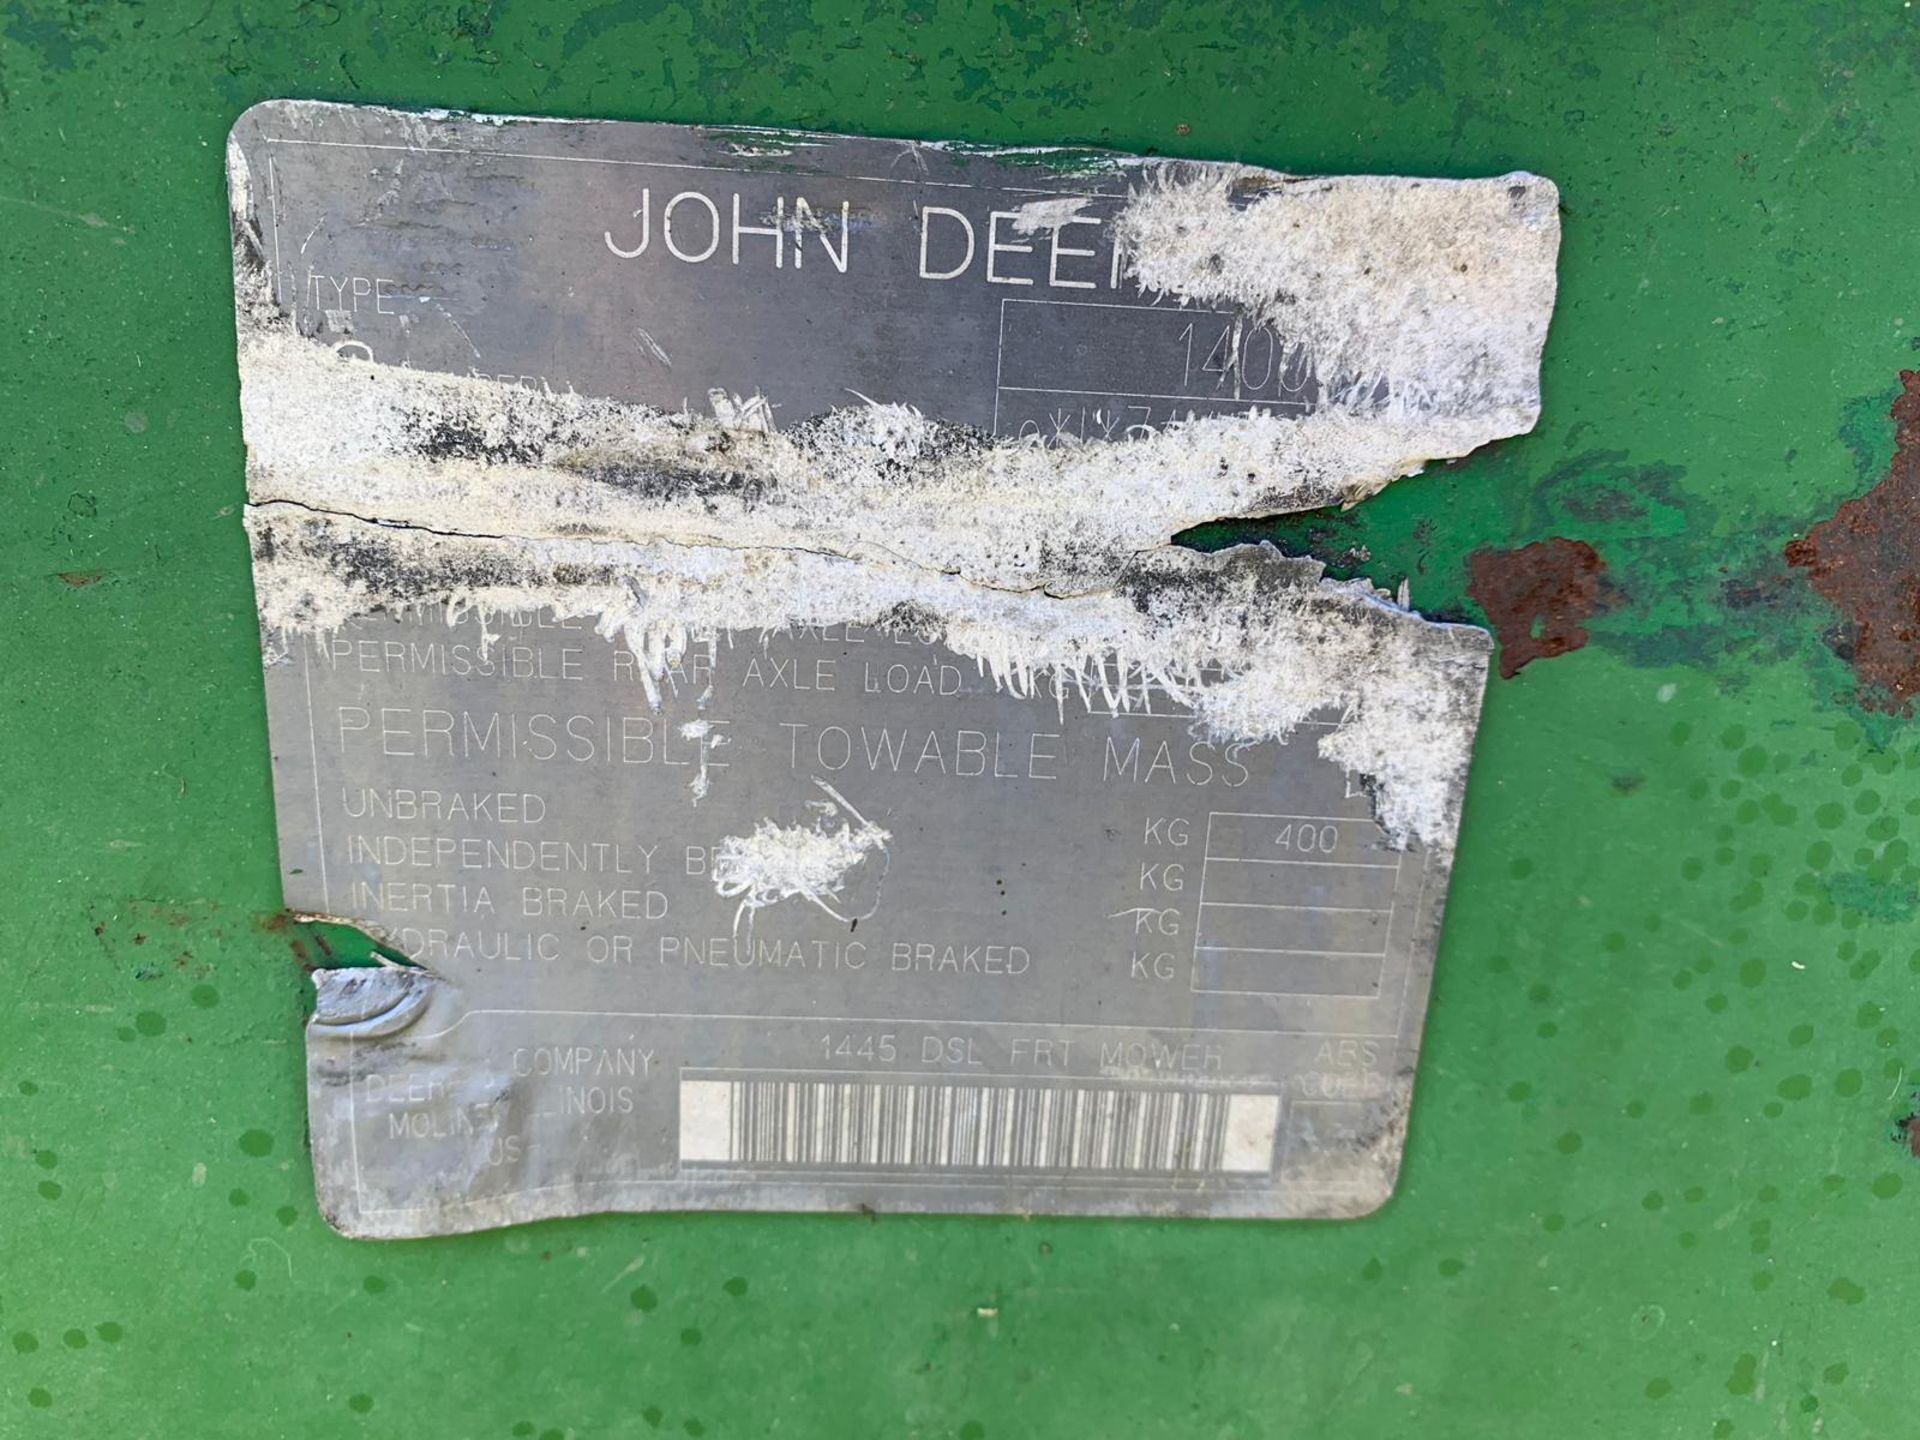 JOHN DEERE 1445 SERIES II 4WD RIDE ON DIESEL LAWN MOWER C/W OUT-FRONT ROTARY CUTTING DECK *PLUS VAT* - Image 14 of 14